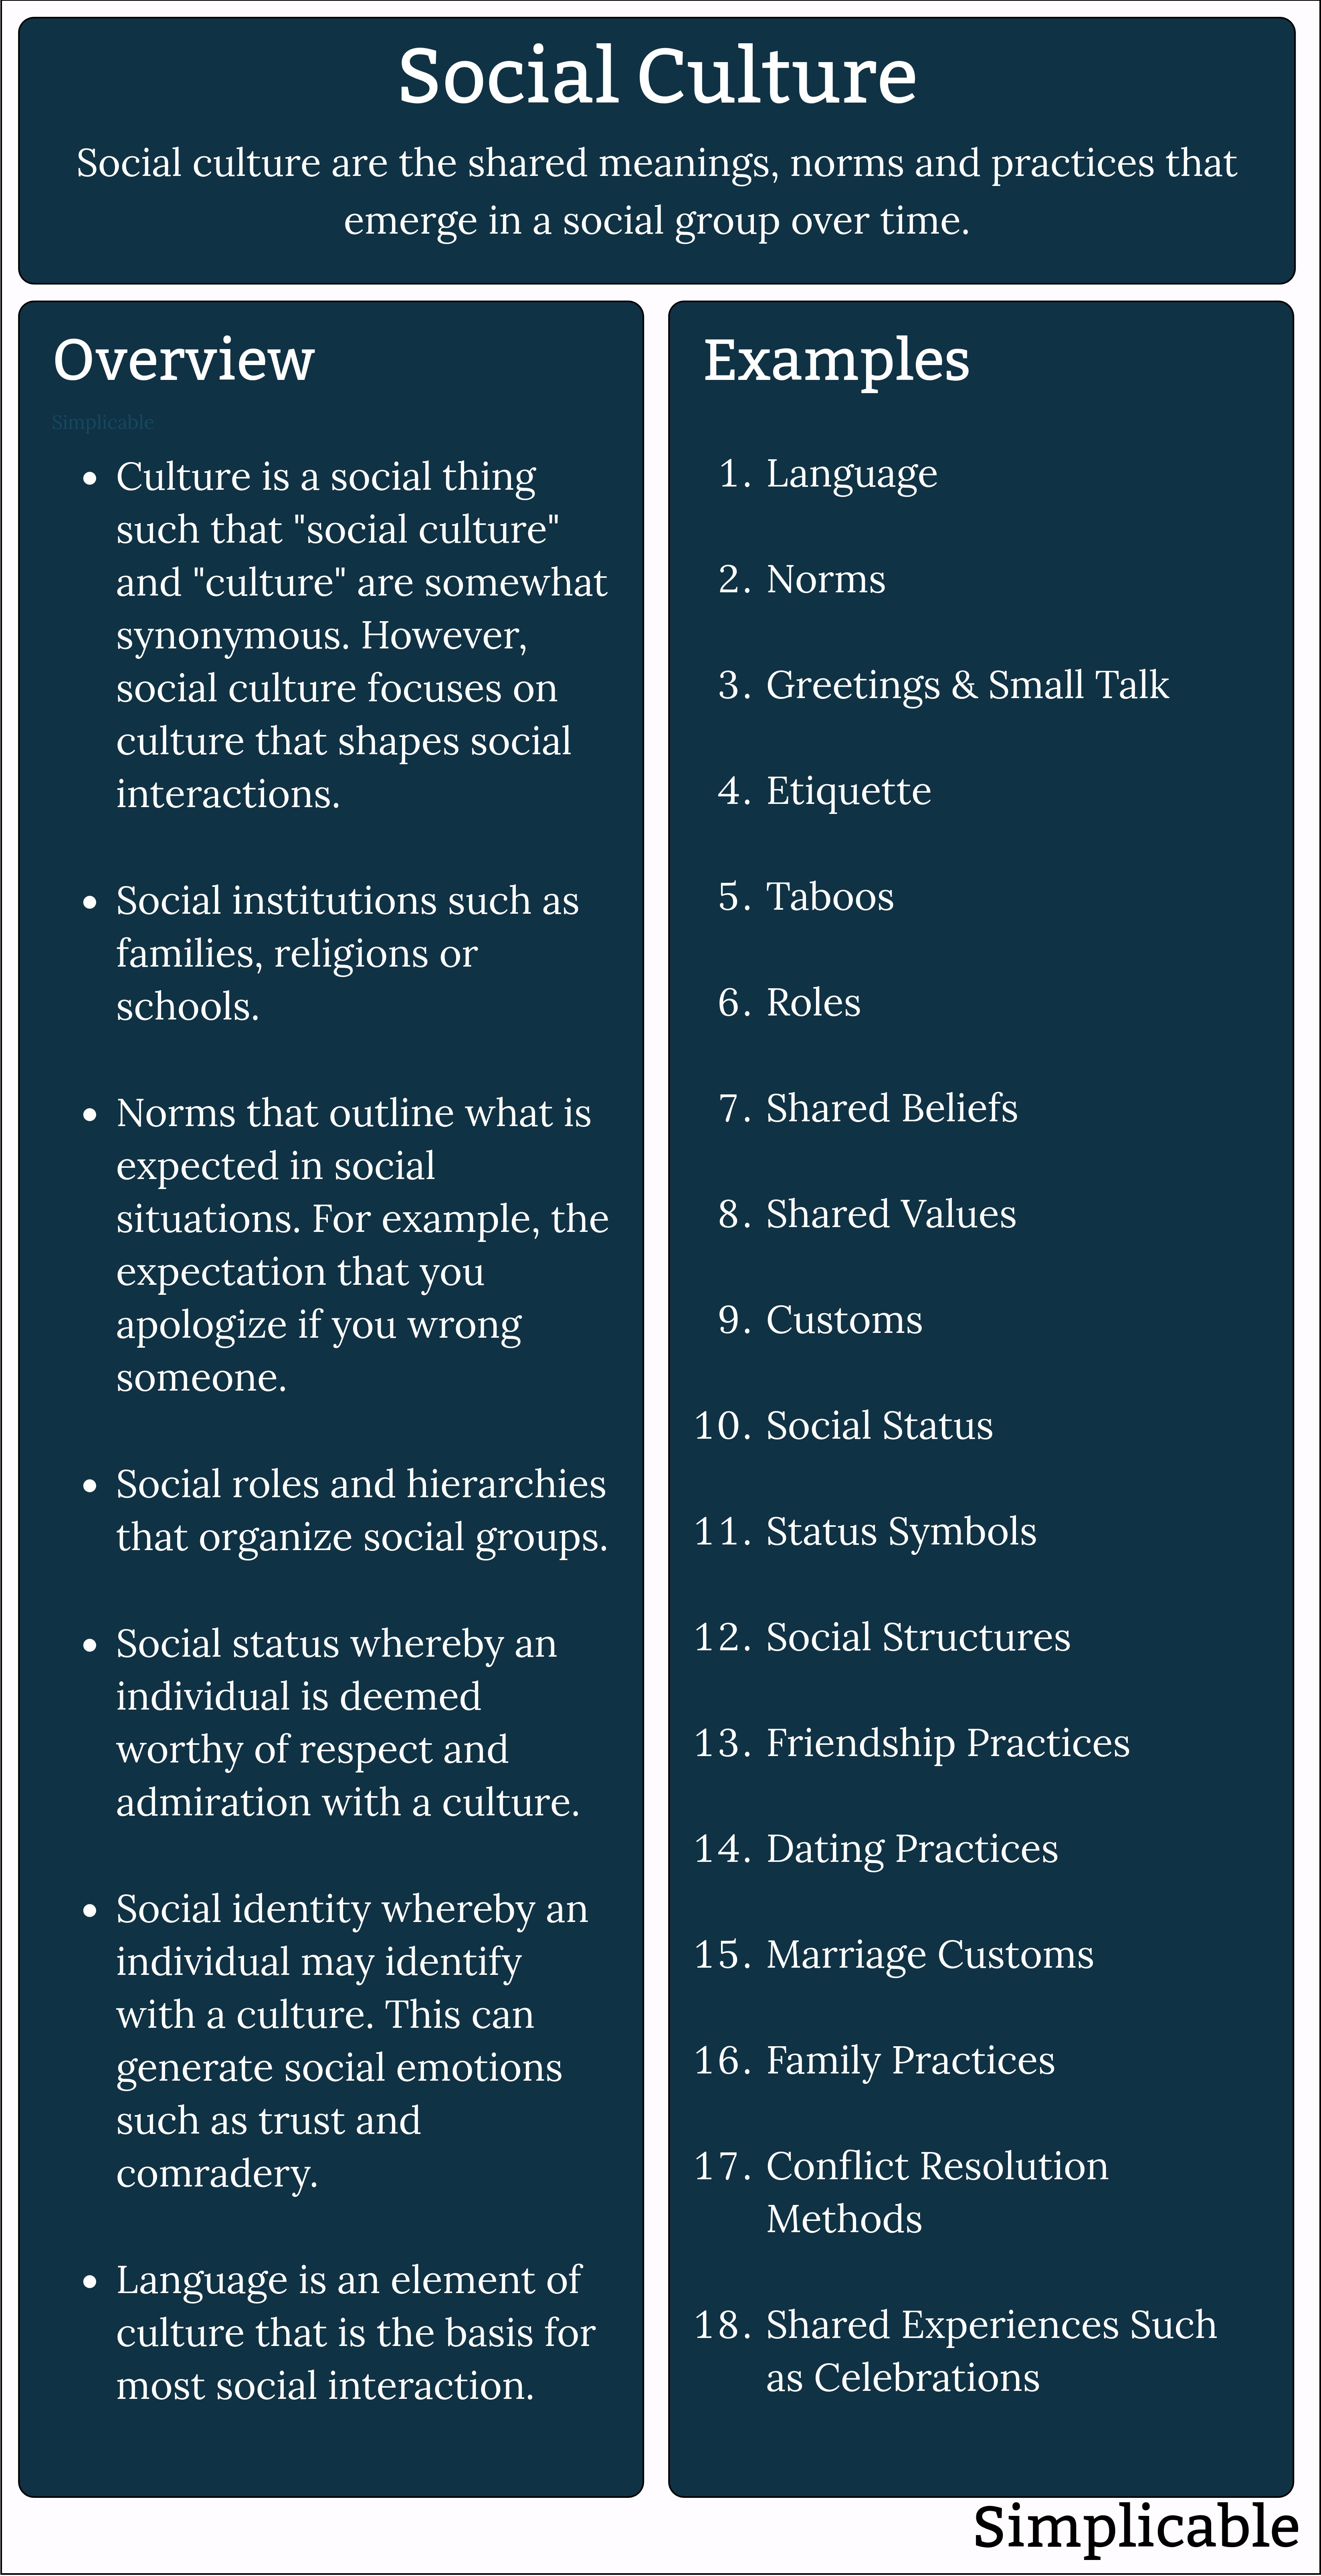 social culture overview and examples